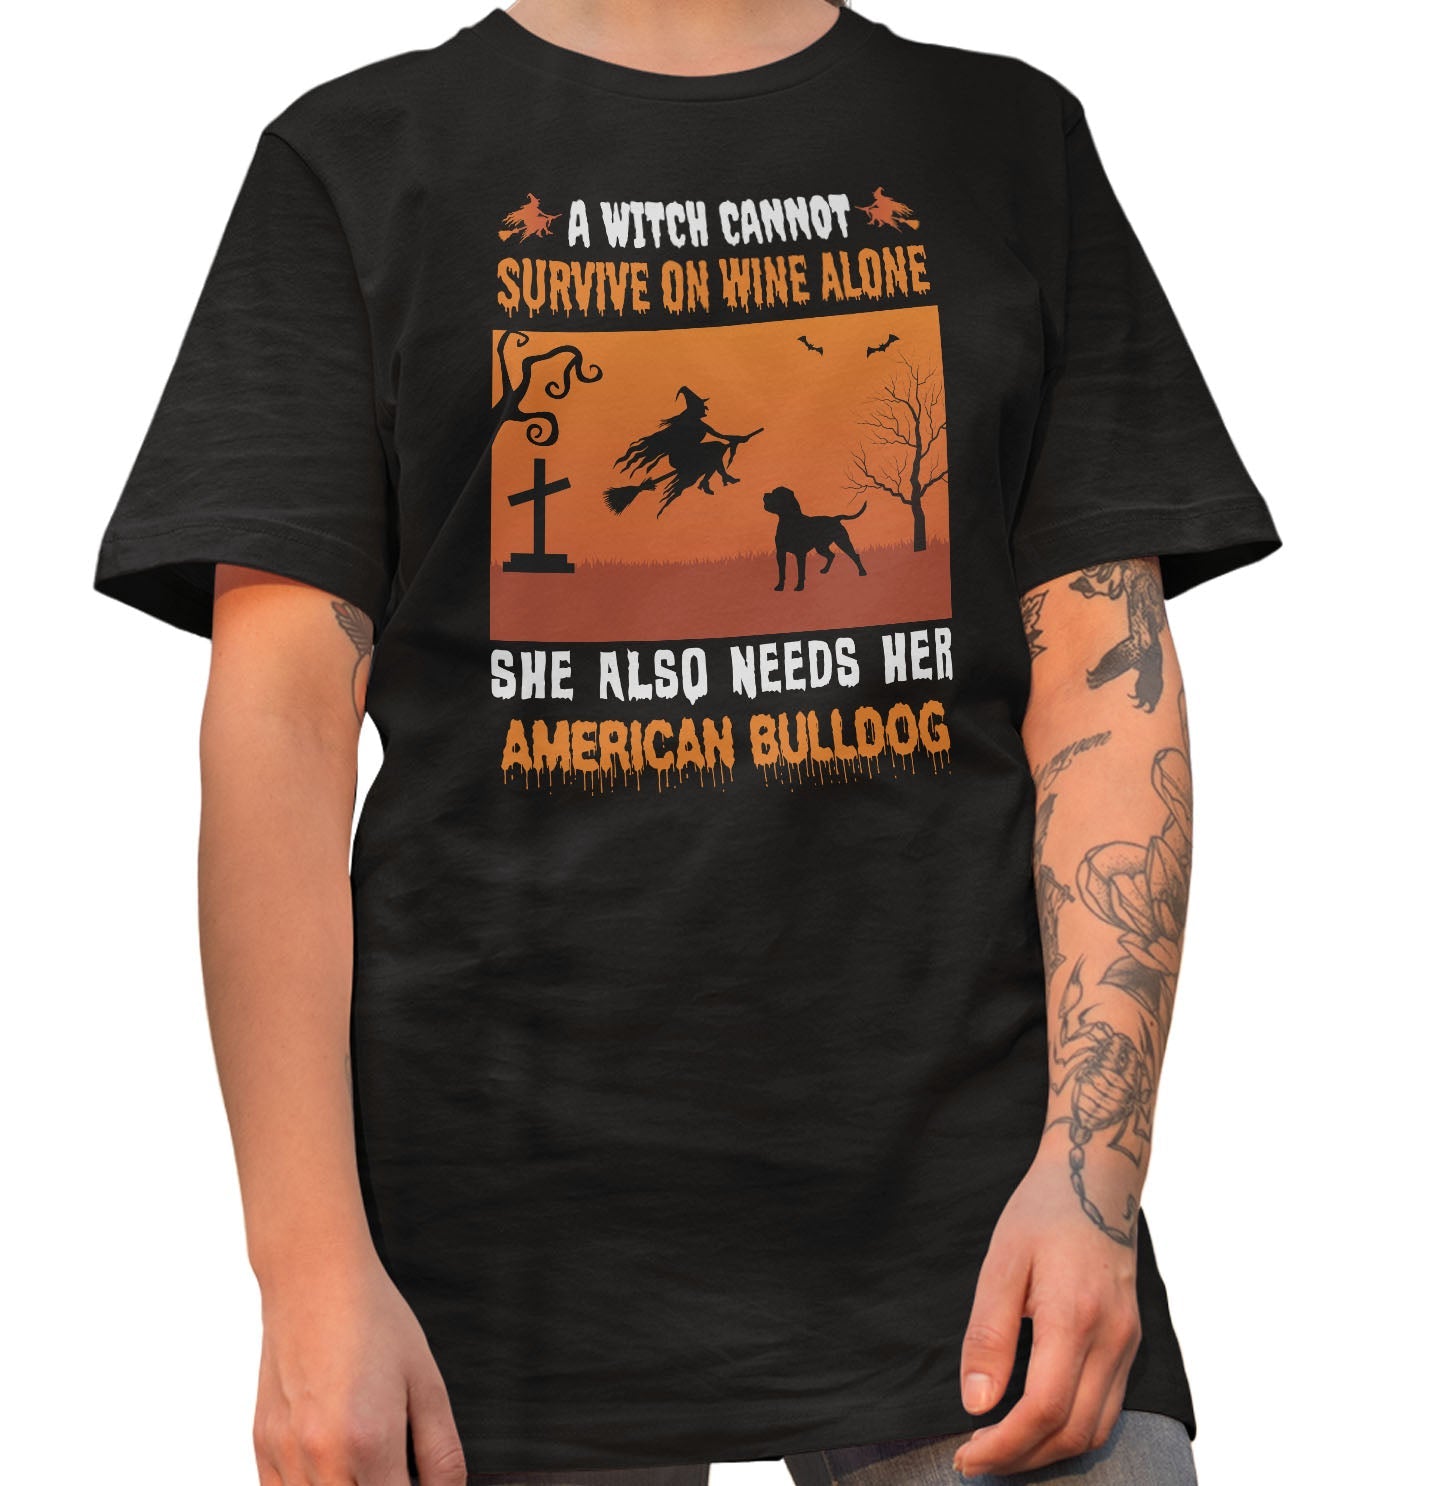 A Witch Needs Her American Bulldog - Adult Unisex T-Shirt